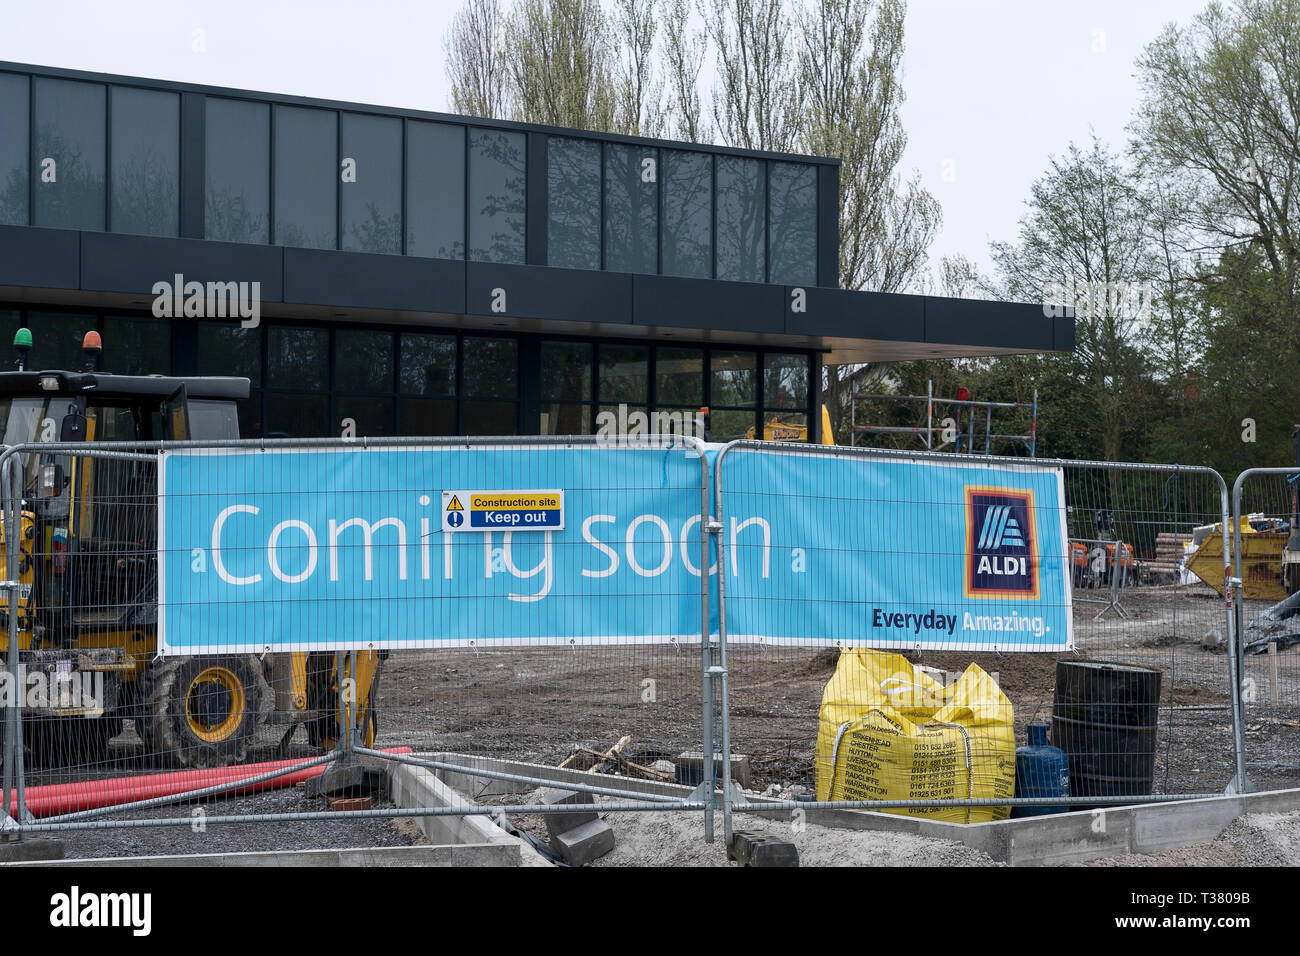 Construction of a new Aldi supermarket on the outskirts of Chester city centre, Cheshire, UK Stock Photo